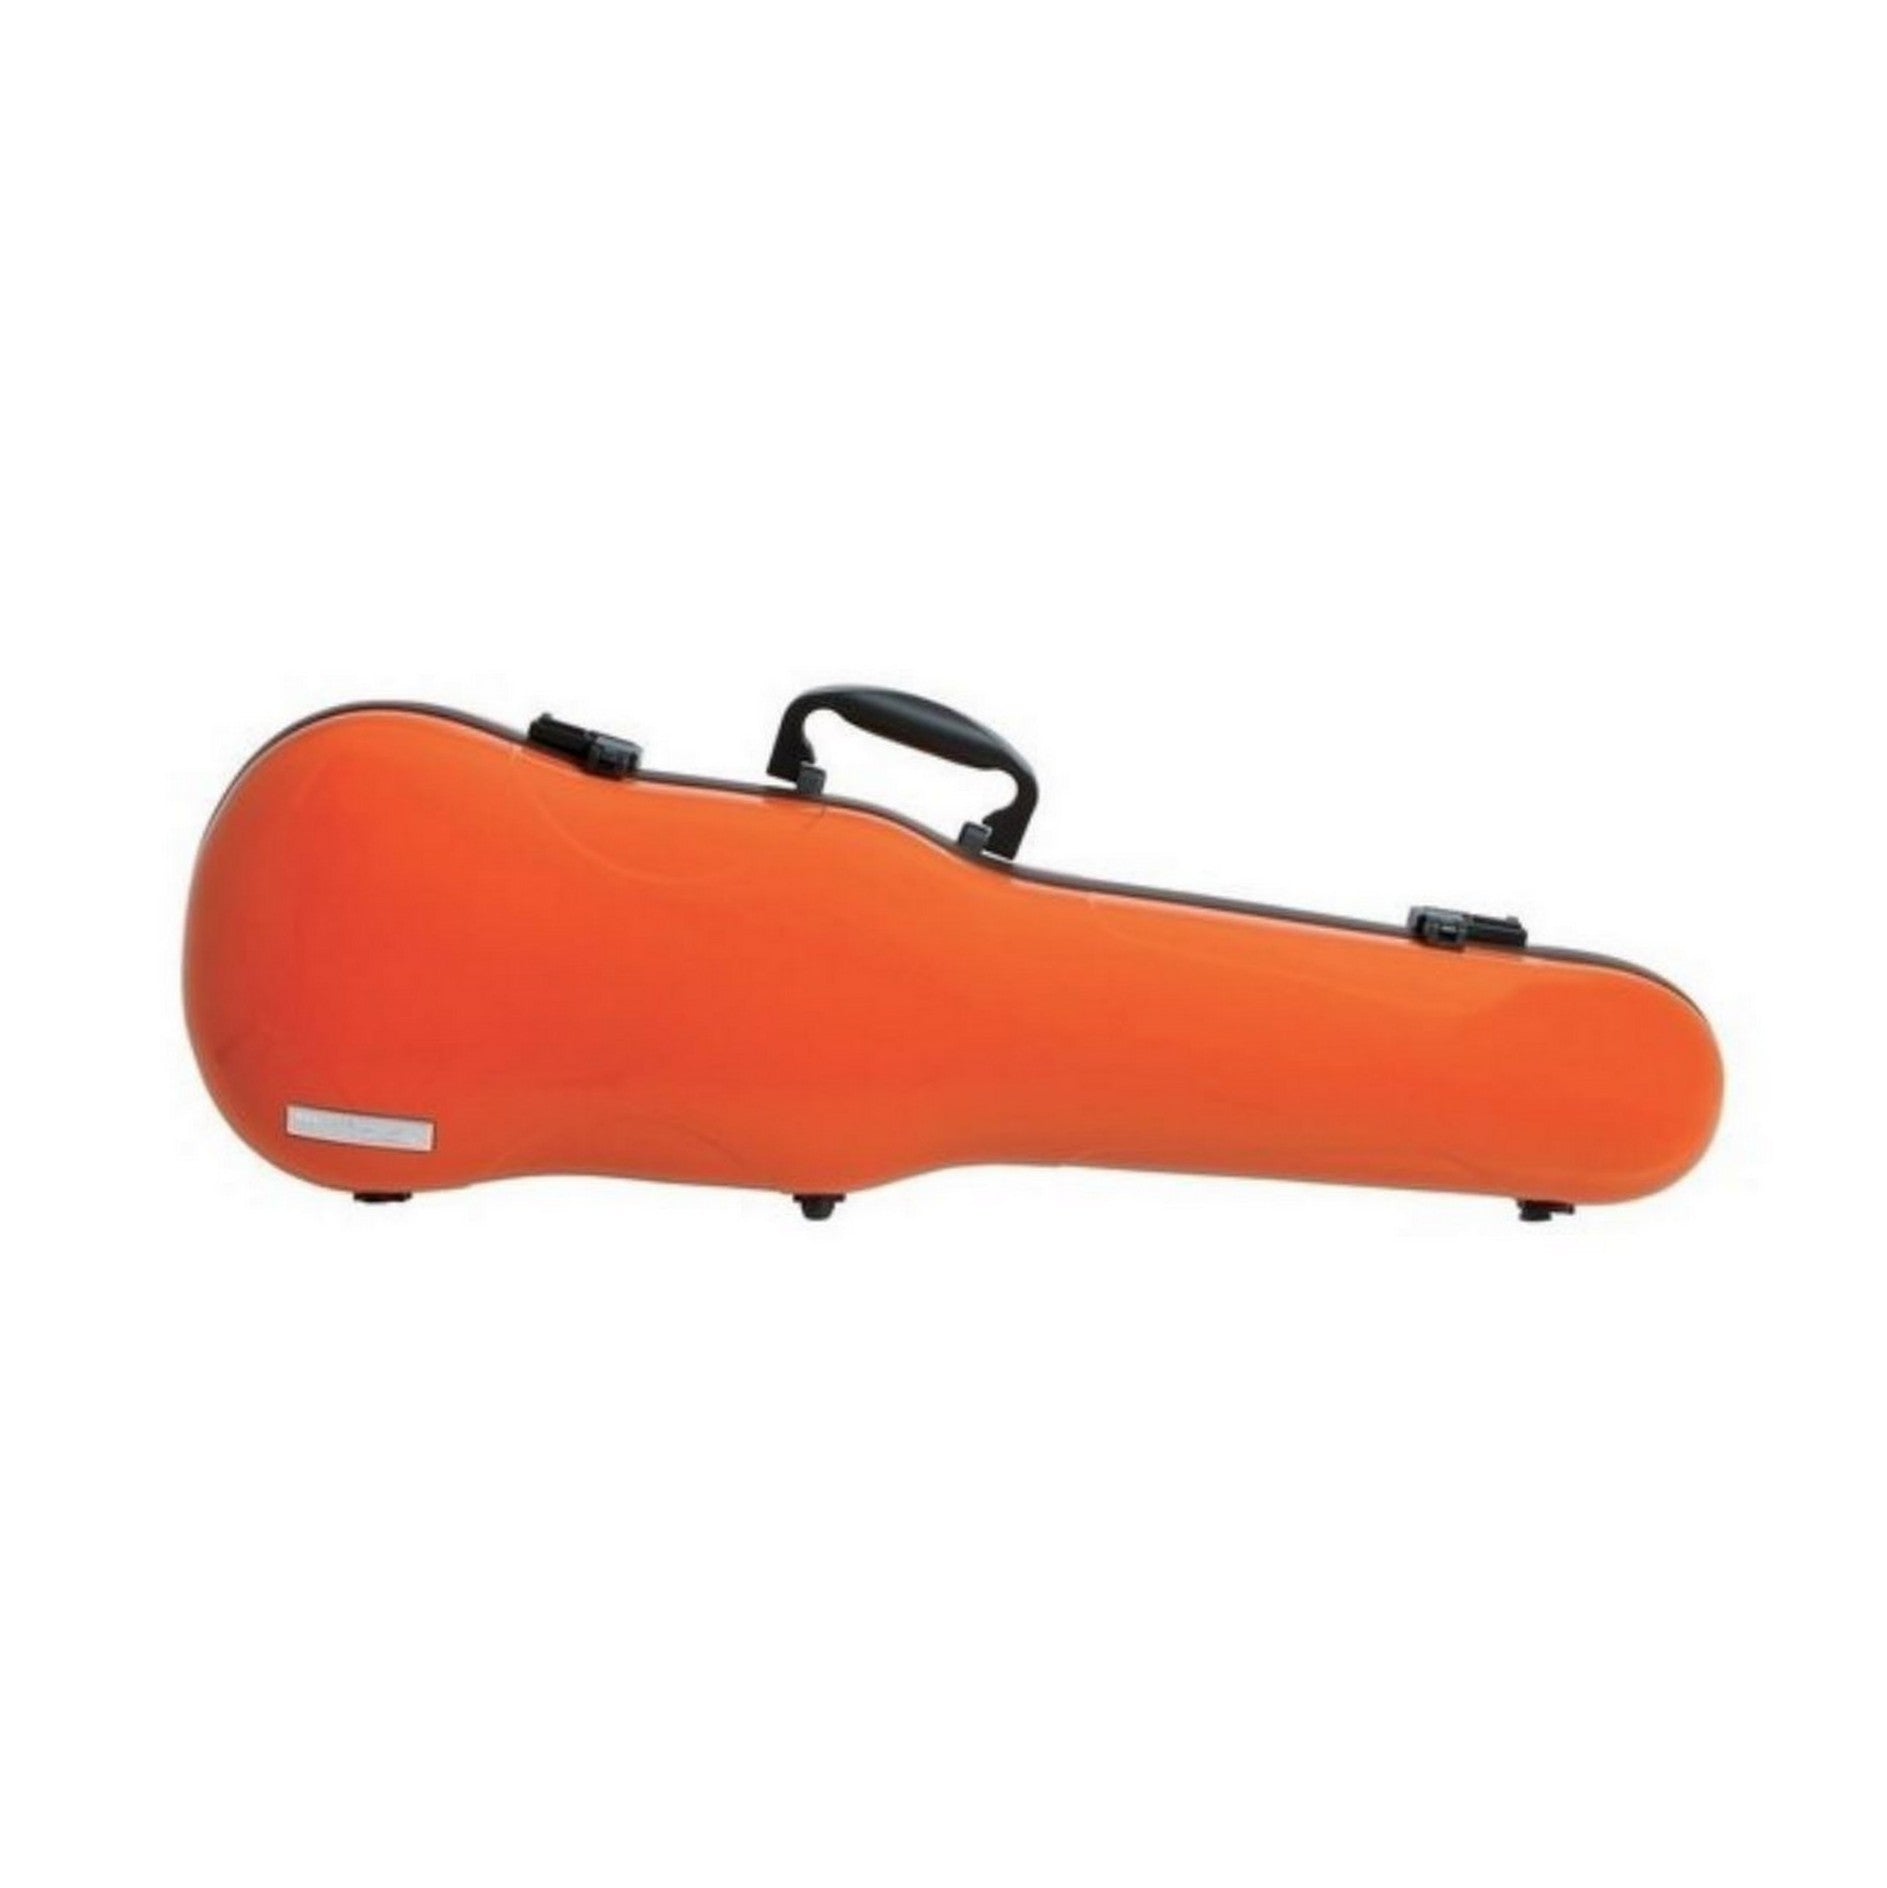 GEWA Air 1.7 Violin Case *In Stock NOW! Colors as listed